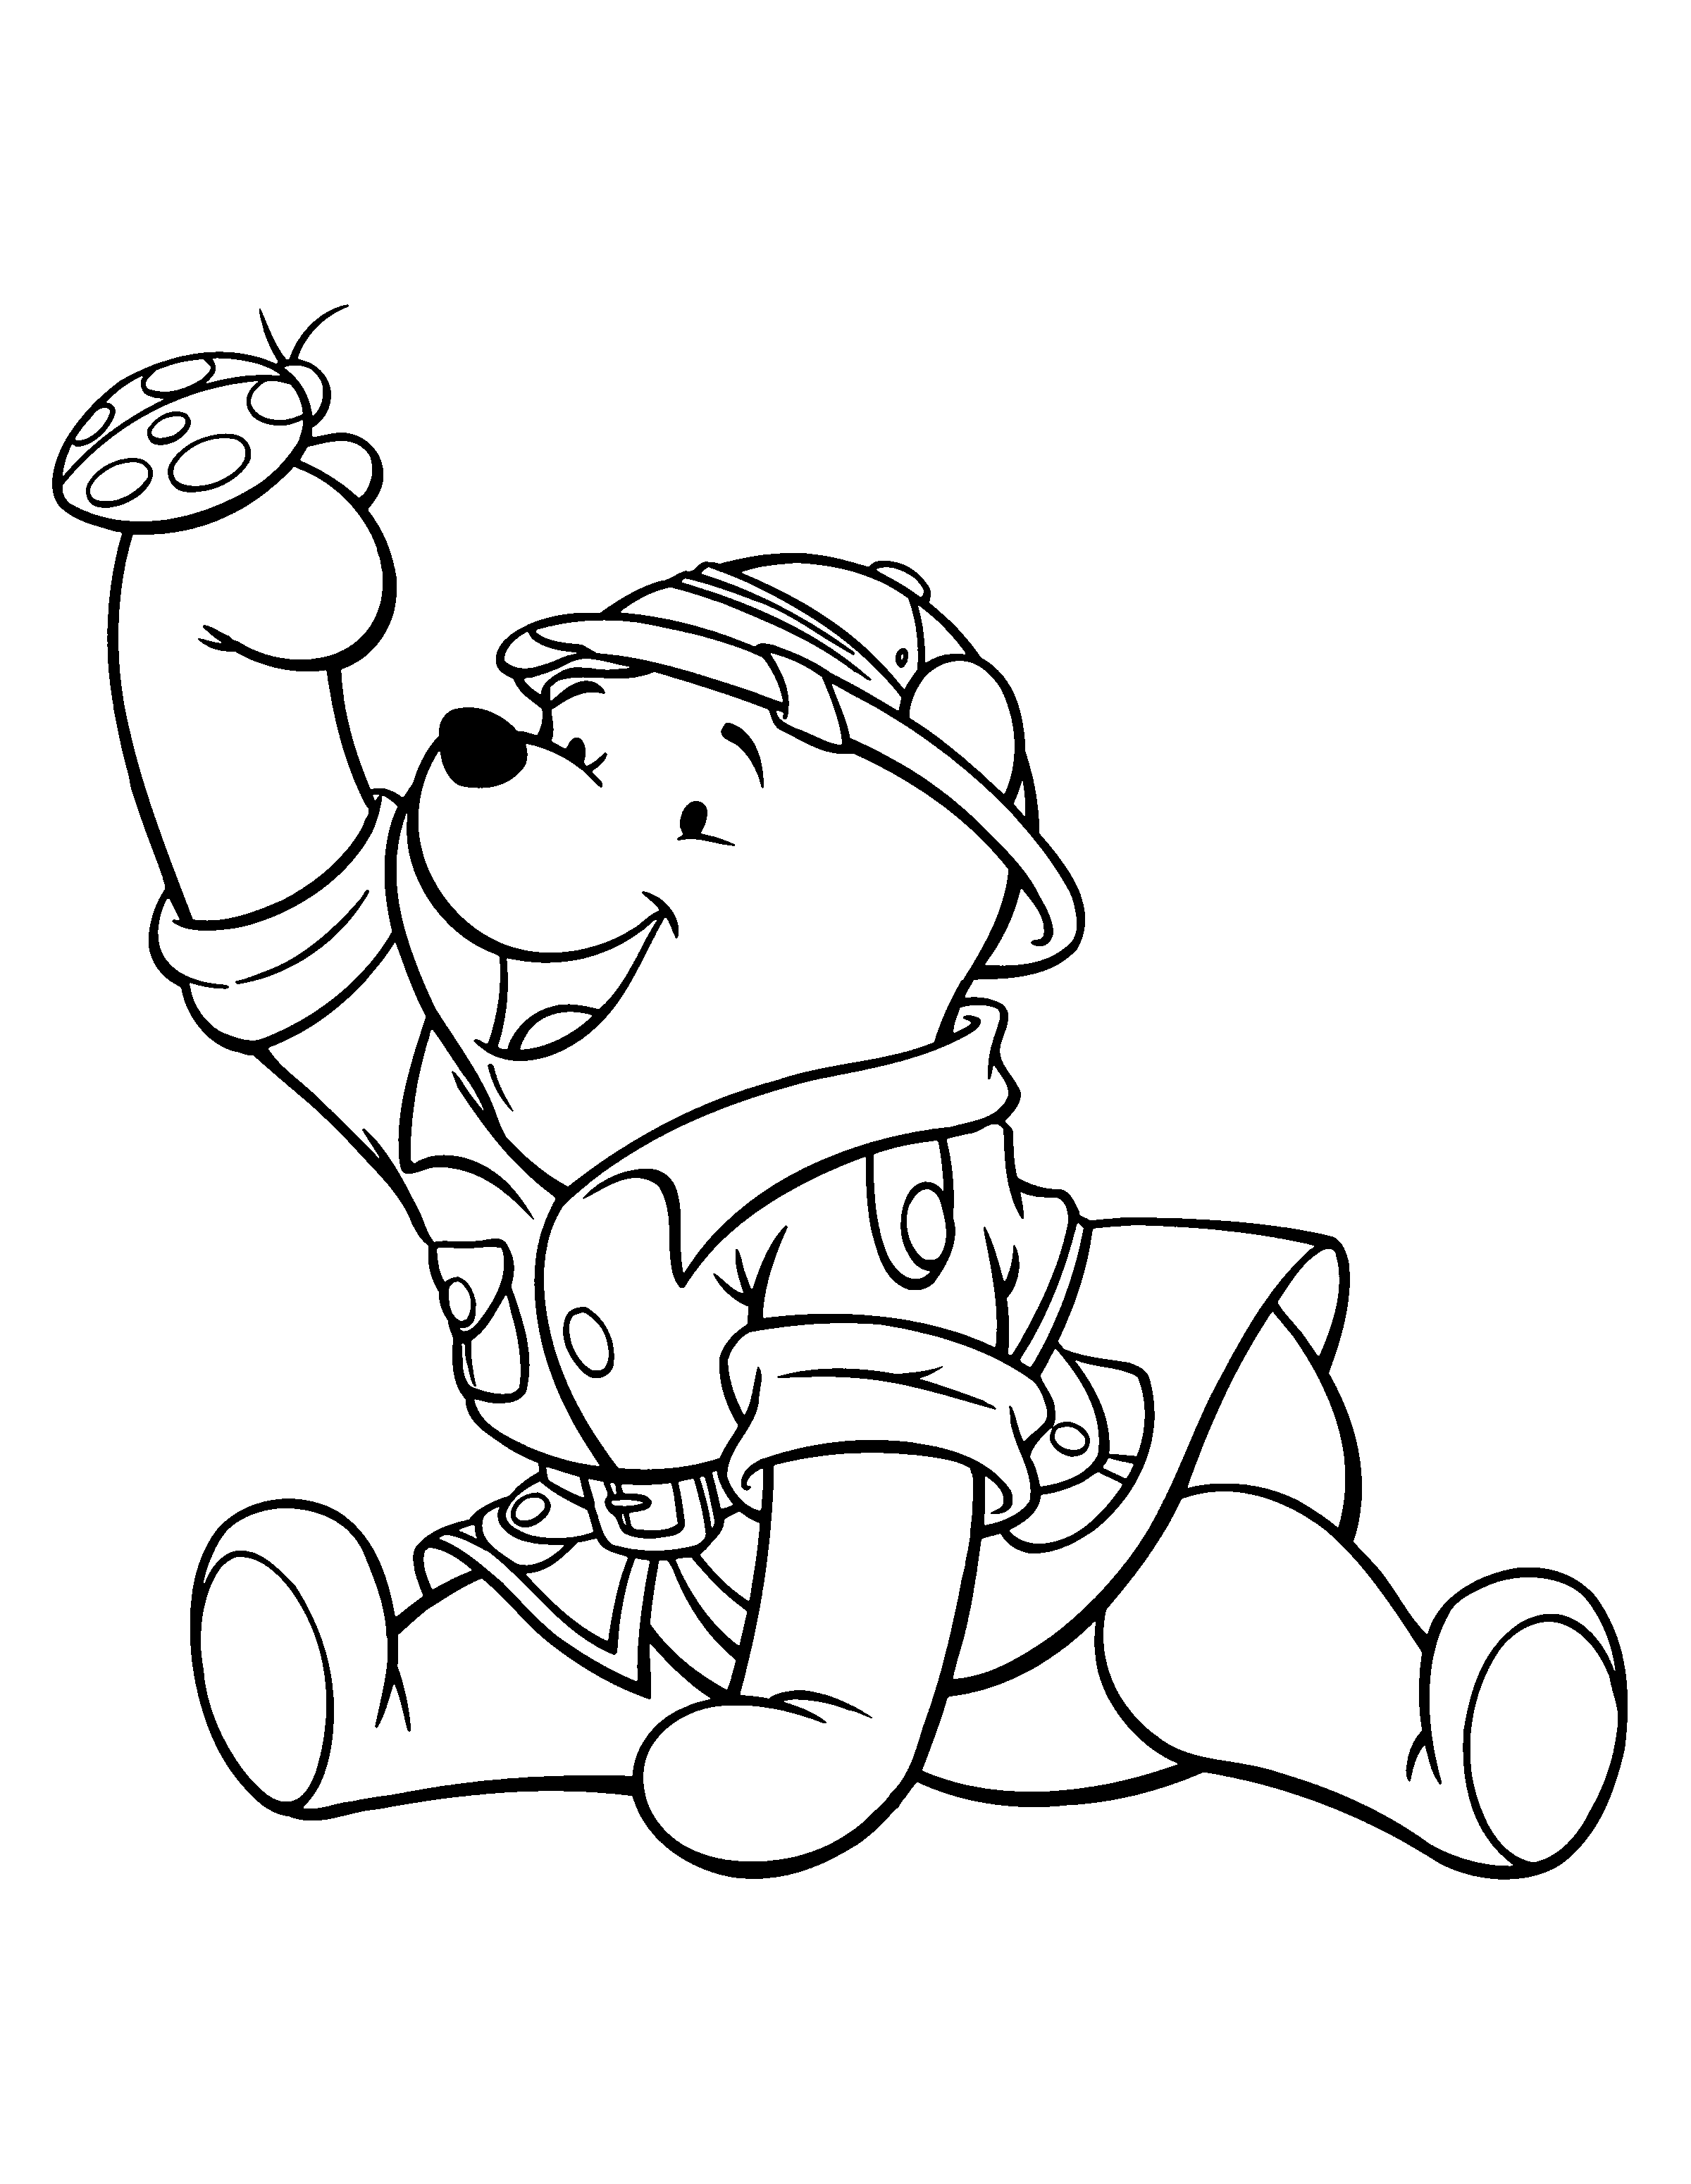 Winnie the Pooh Safari Coloring Pages